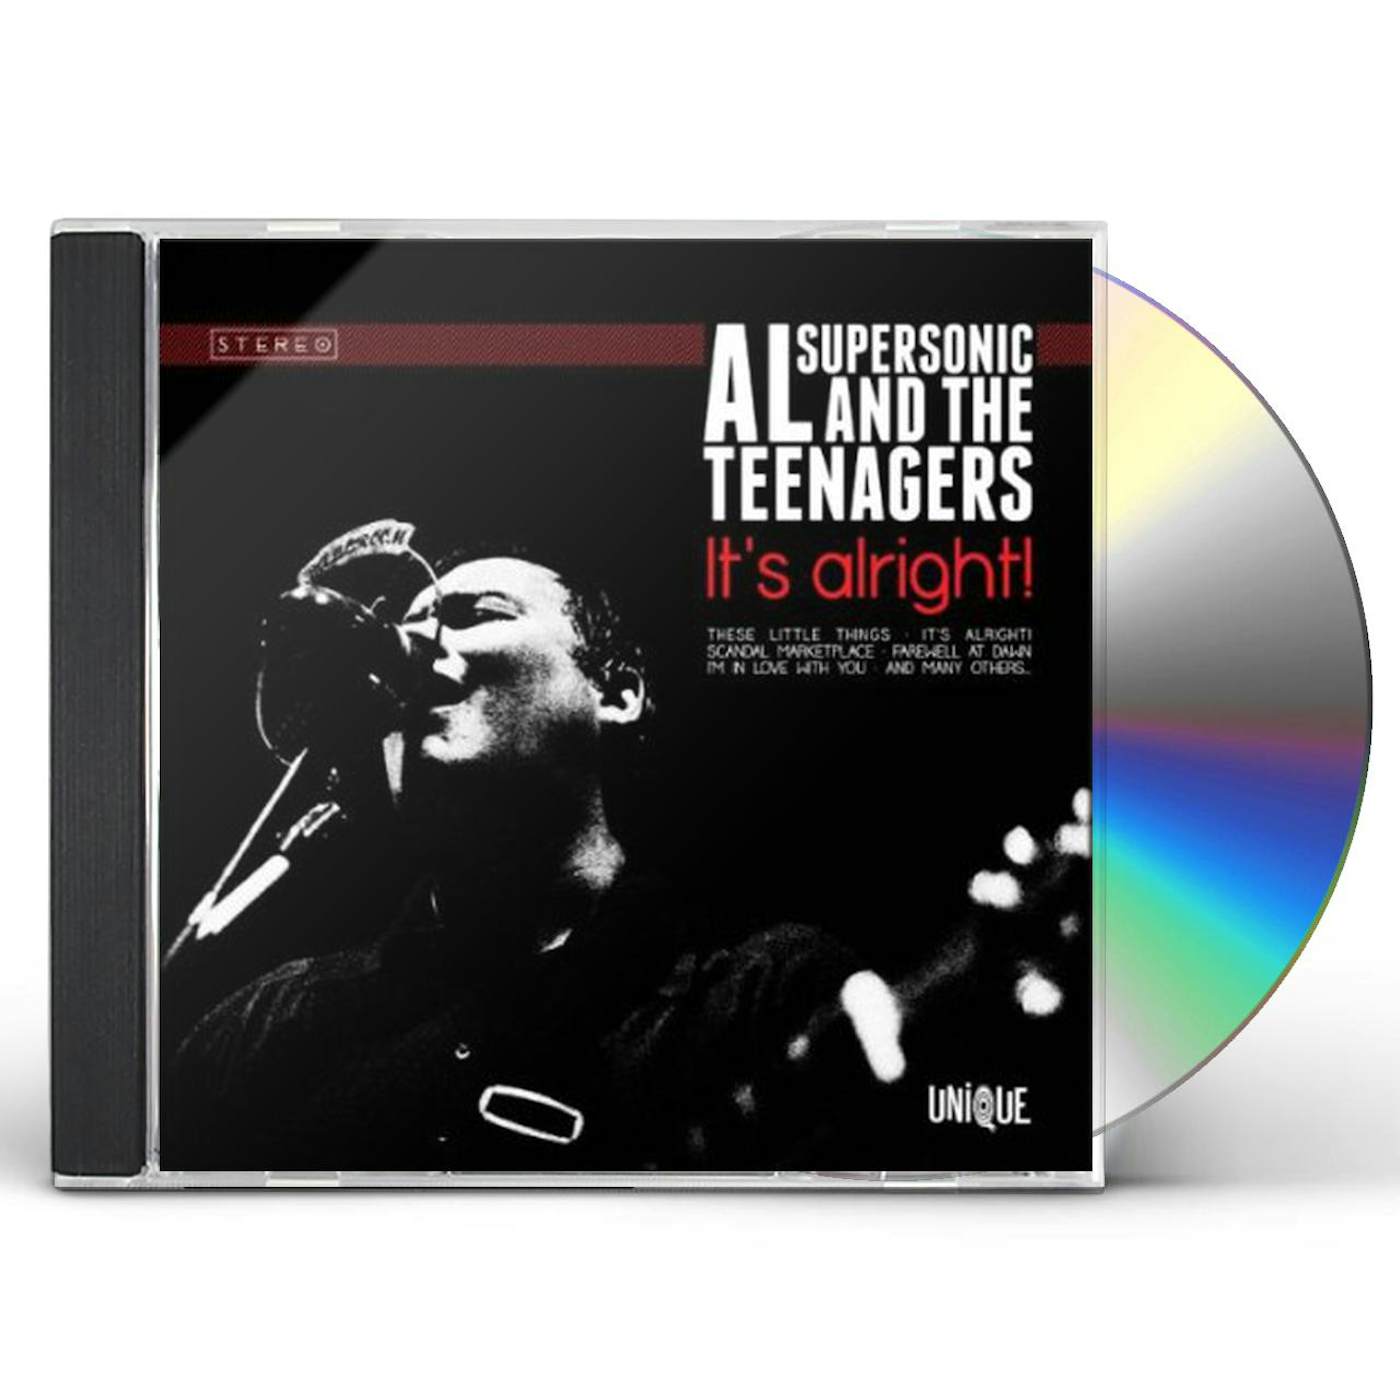 Al Supersonic & The Teenagers IT'S ALRIGHT CD